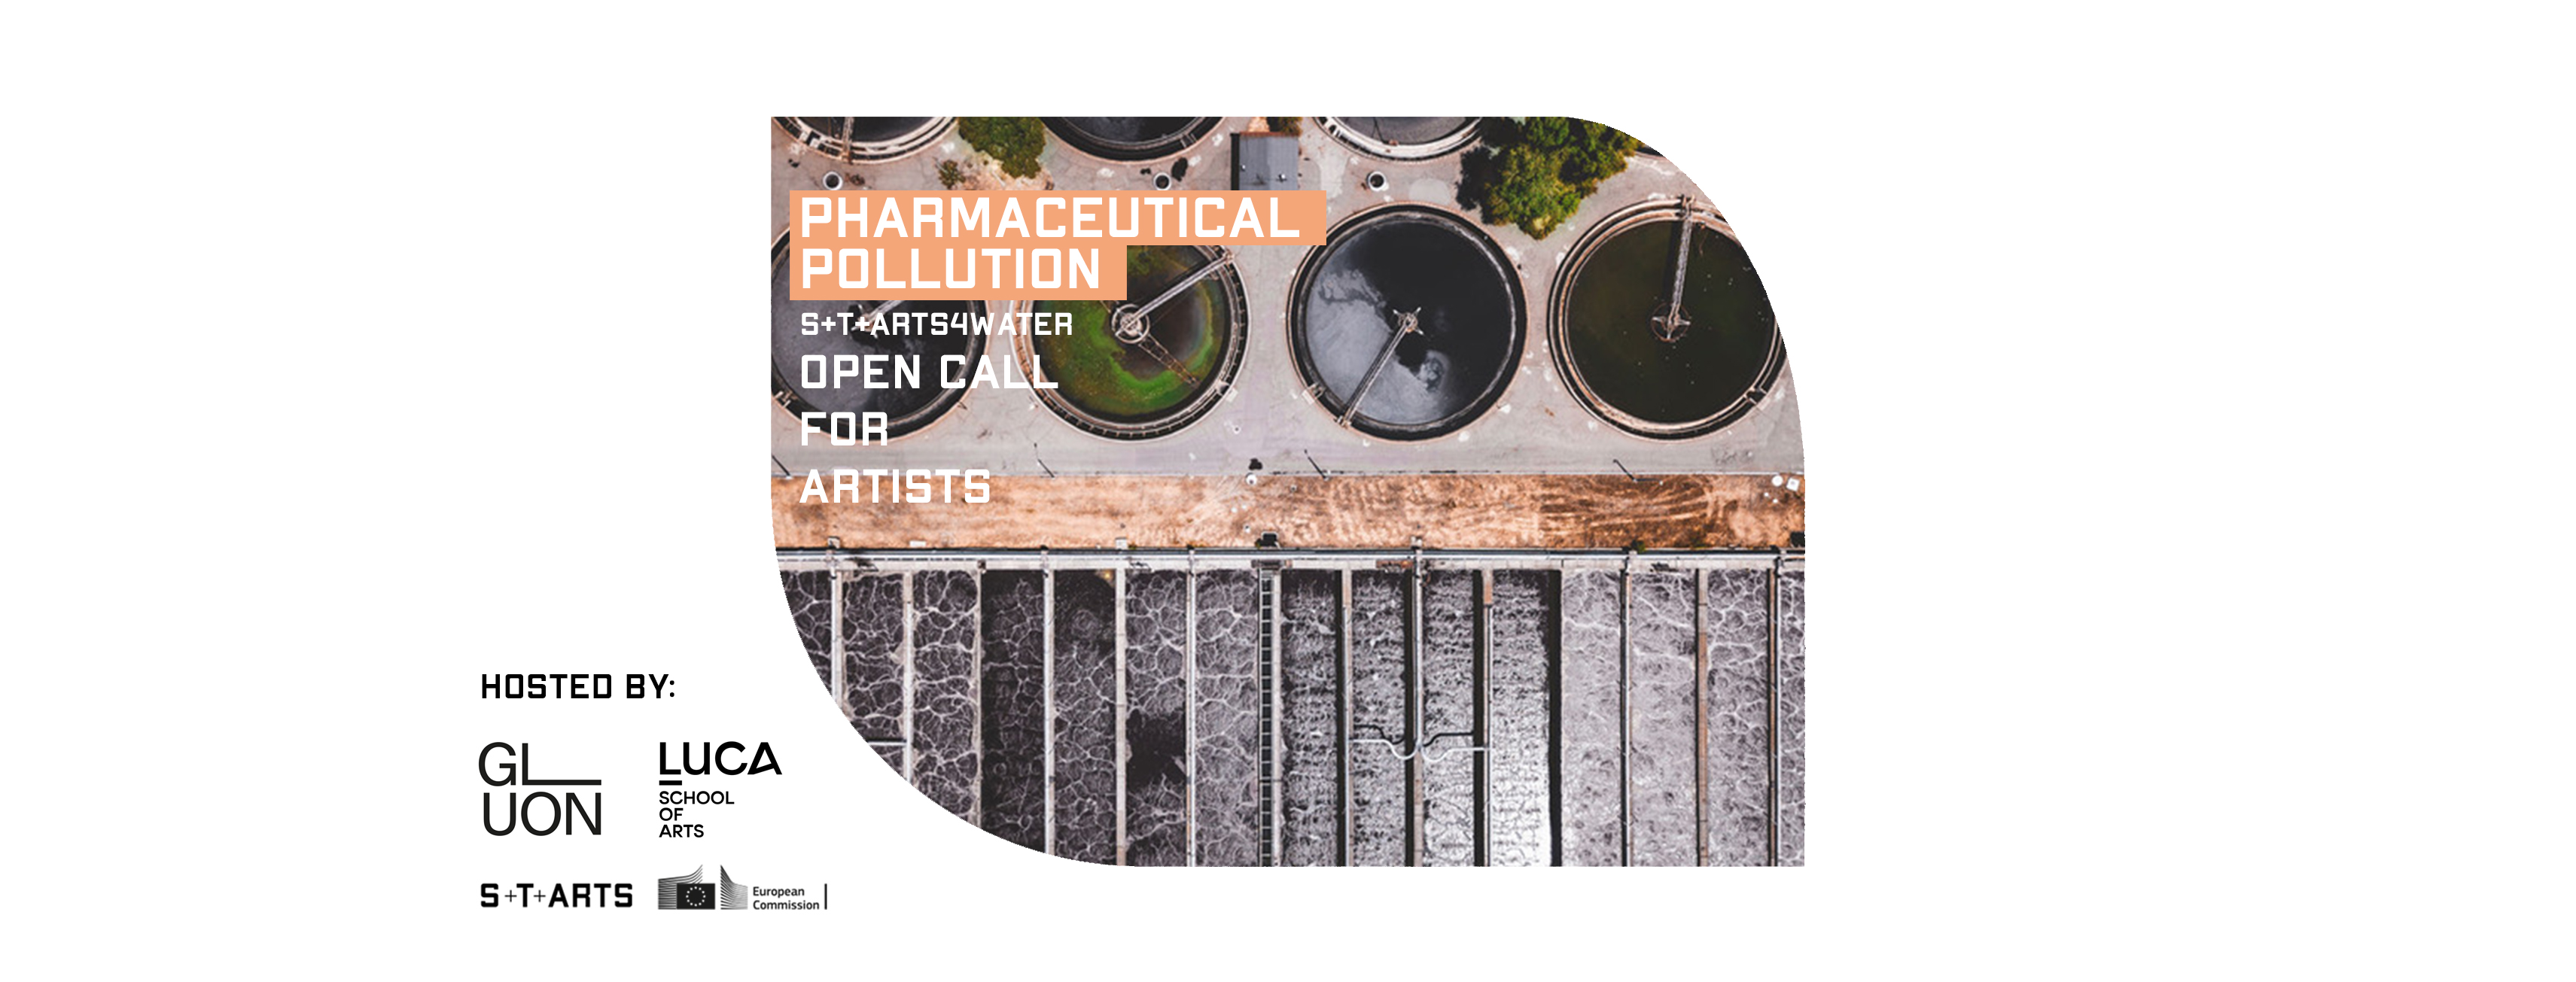 S+T+ARTS4Water Open Call Pharmaceutical pollution